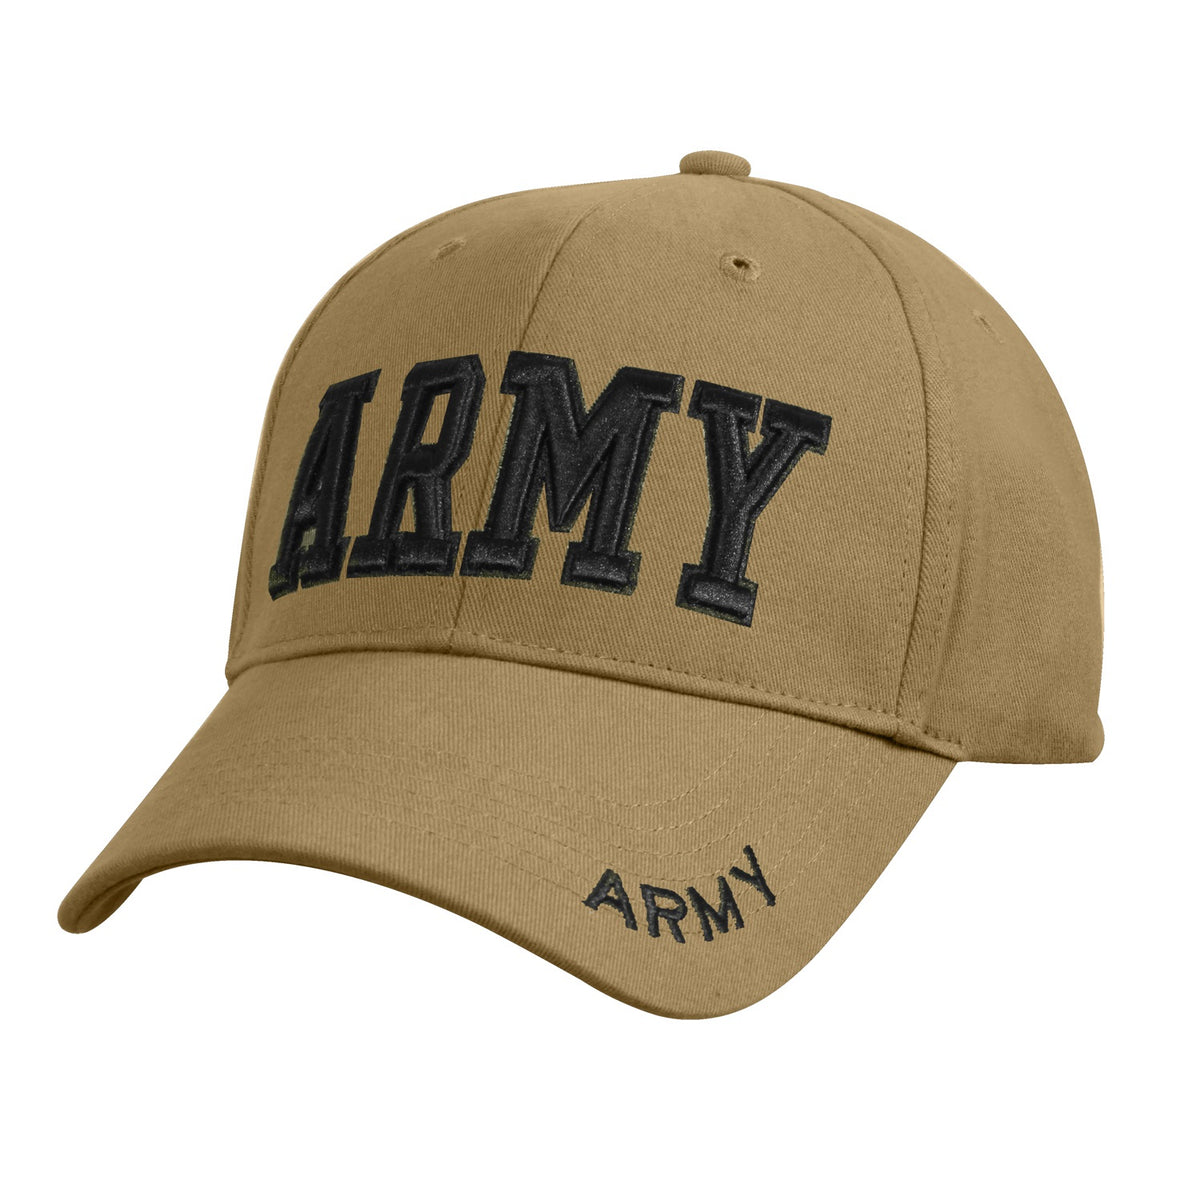 Rothco Deluxe Army Embroidered Low Profile Insignia Cap Coyote Brown